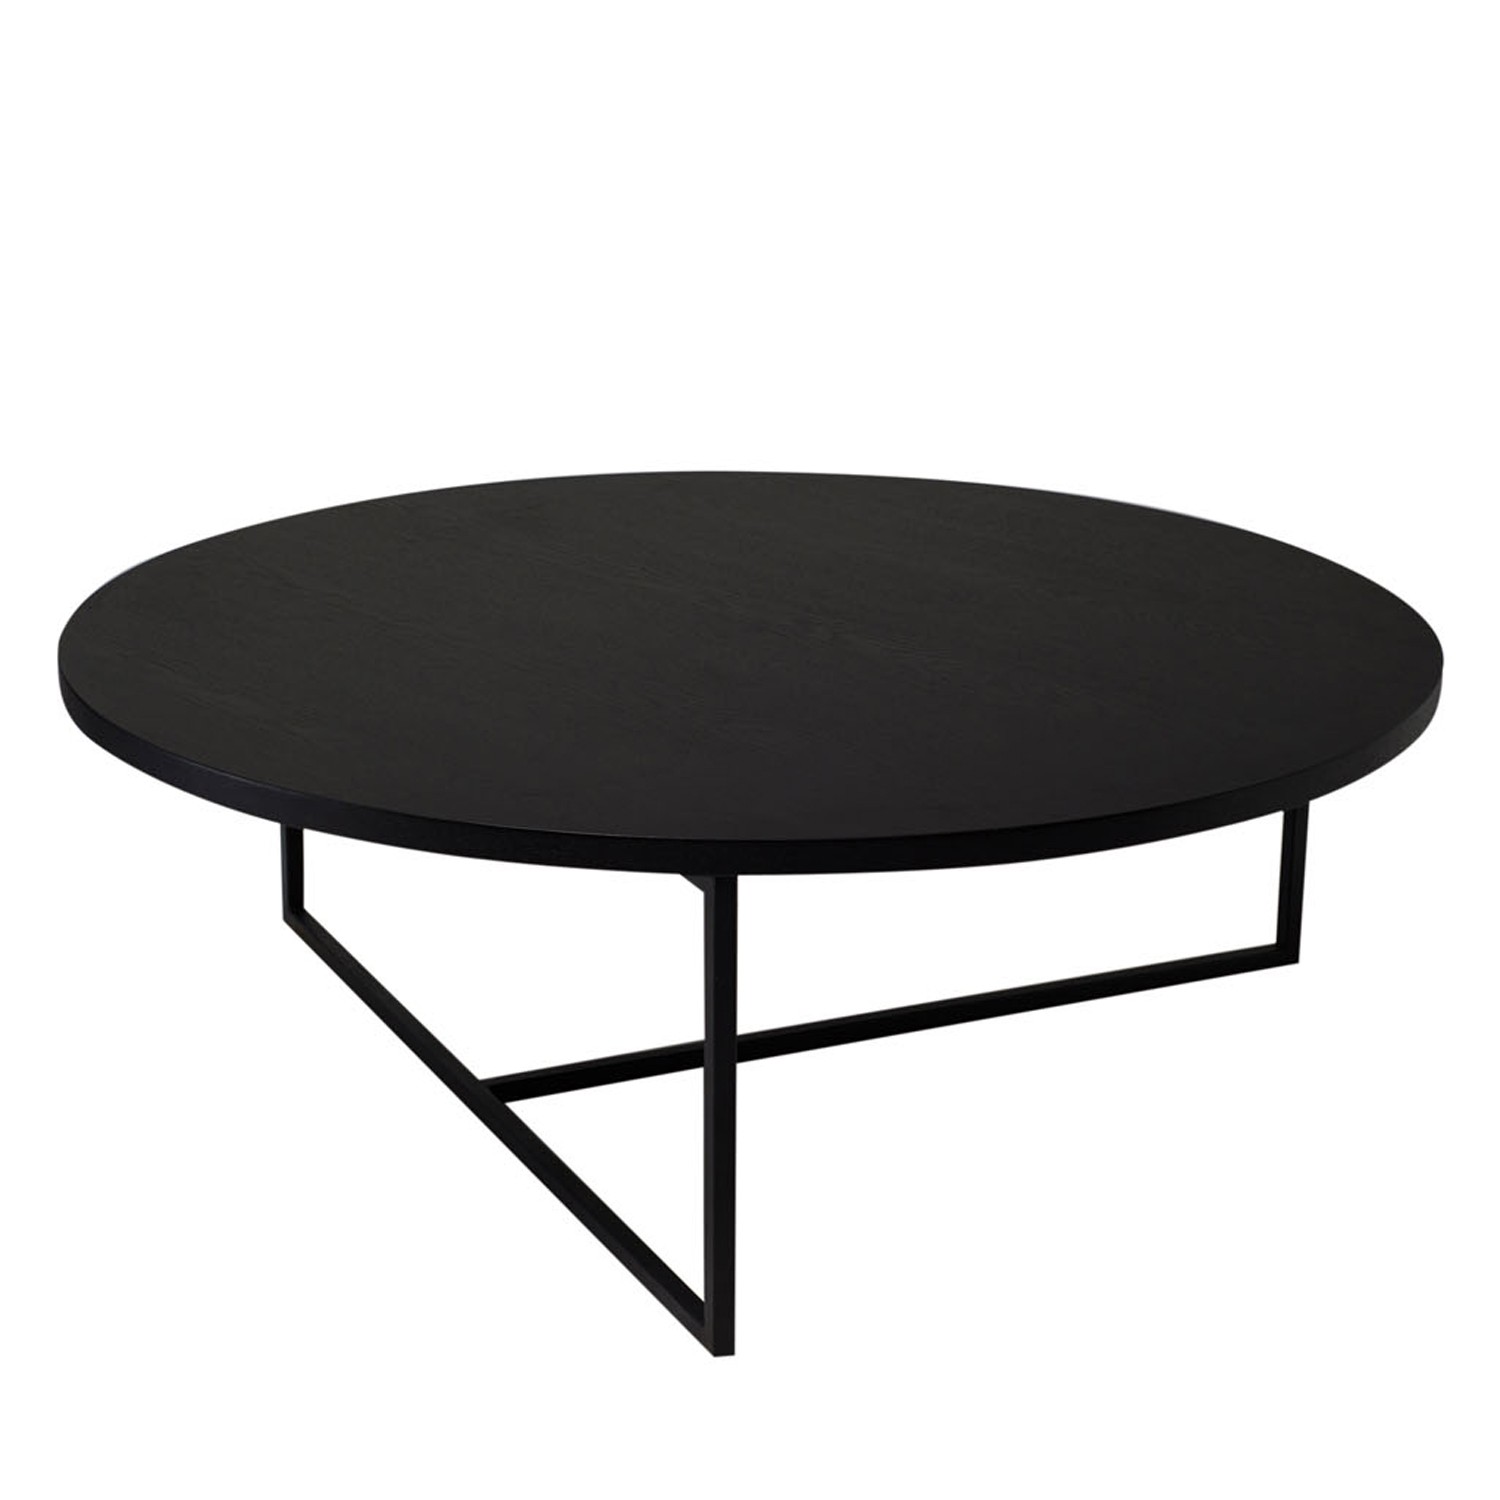 tactical walls the fantastic amazing black side table outdoor how make round coffee decor ideas with shelf stools underneath furniture storage white leather ott standard lamps red